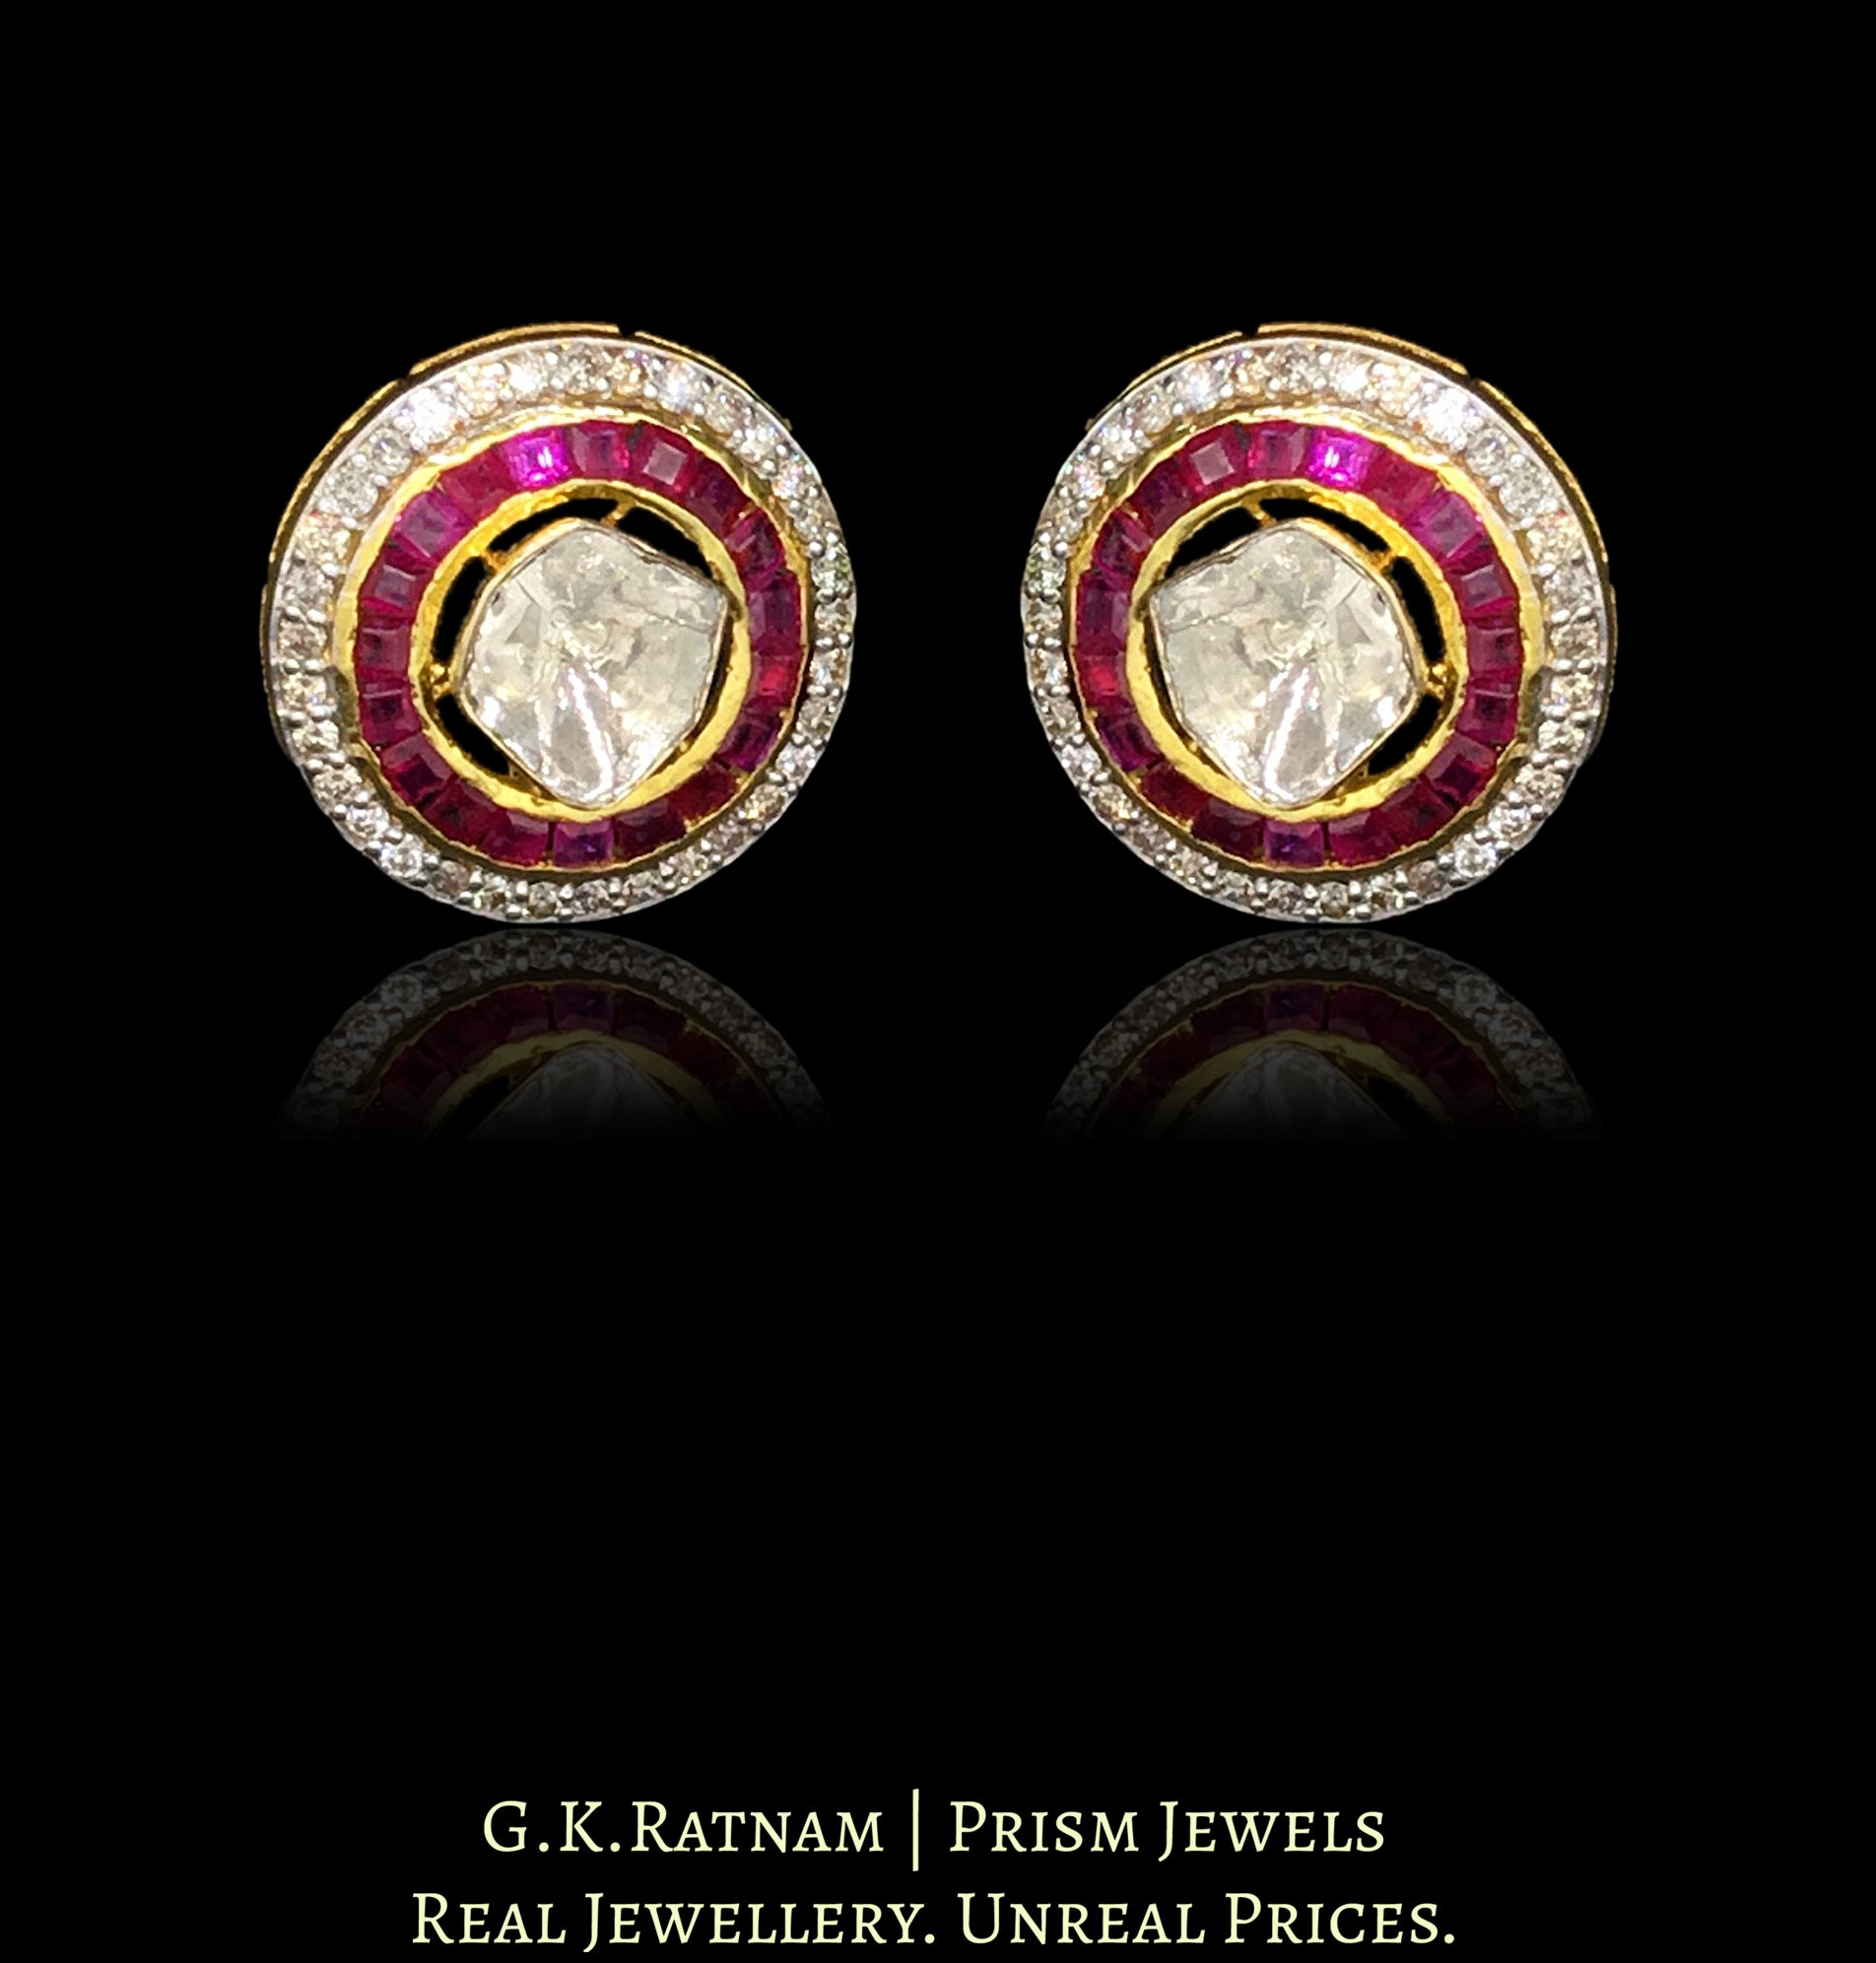 14k Gold and Diamond Polki Open Setting Tops / Studs Earring Pair with big uncuts encased in concentric ruby and diamond rims